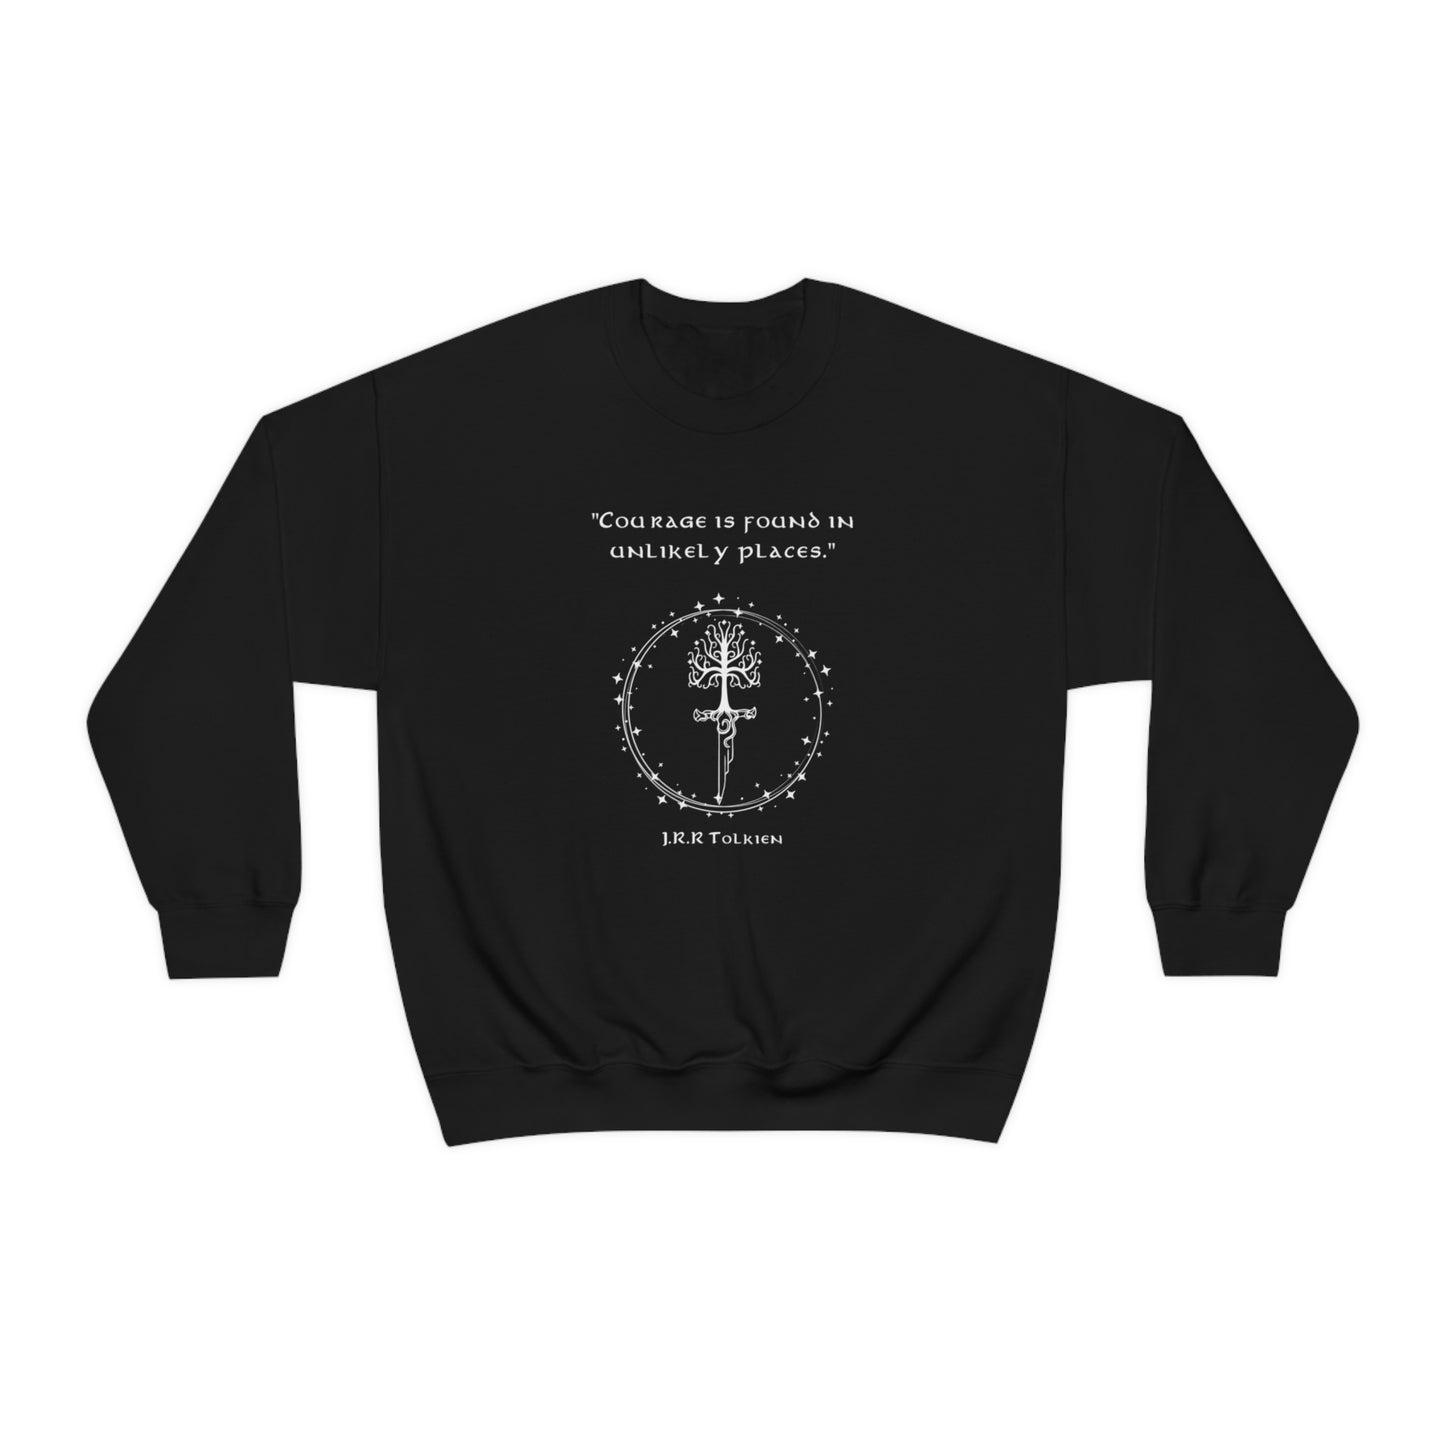 "COURAGE IS FOUND IN UNLIKLEY PLACES" SWEATSHIRT